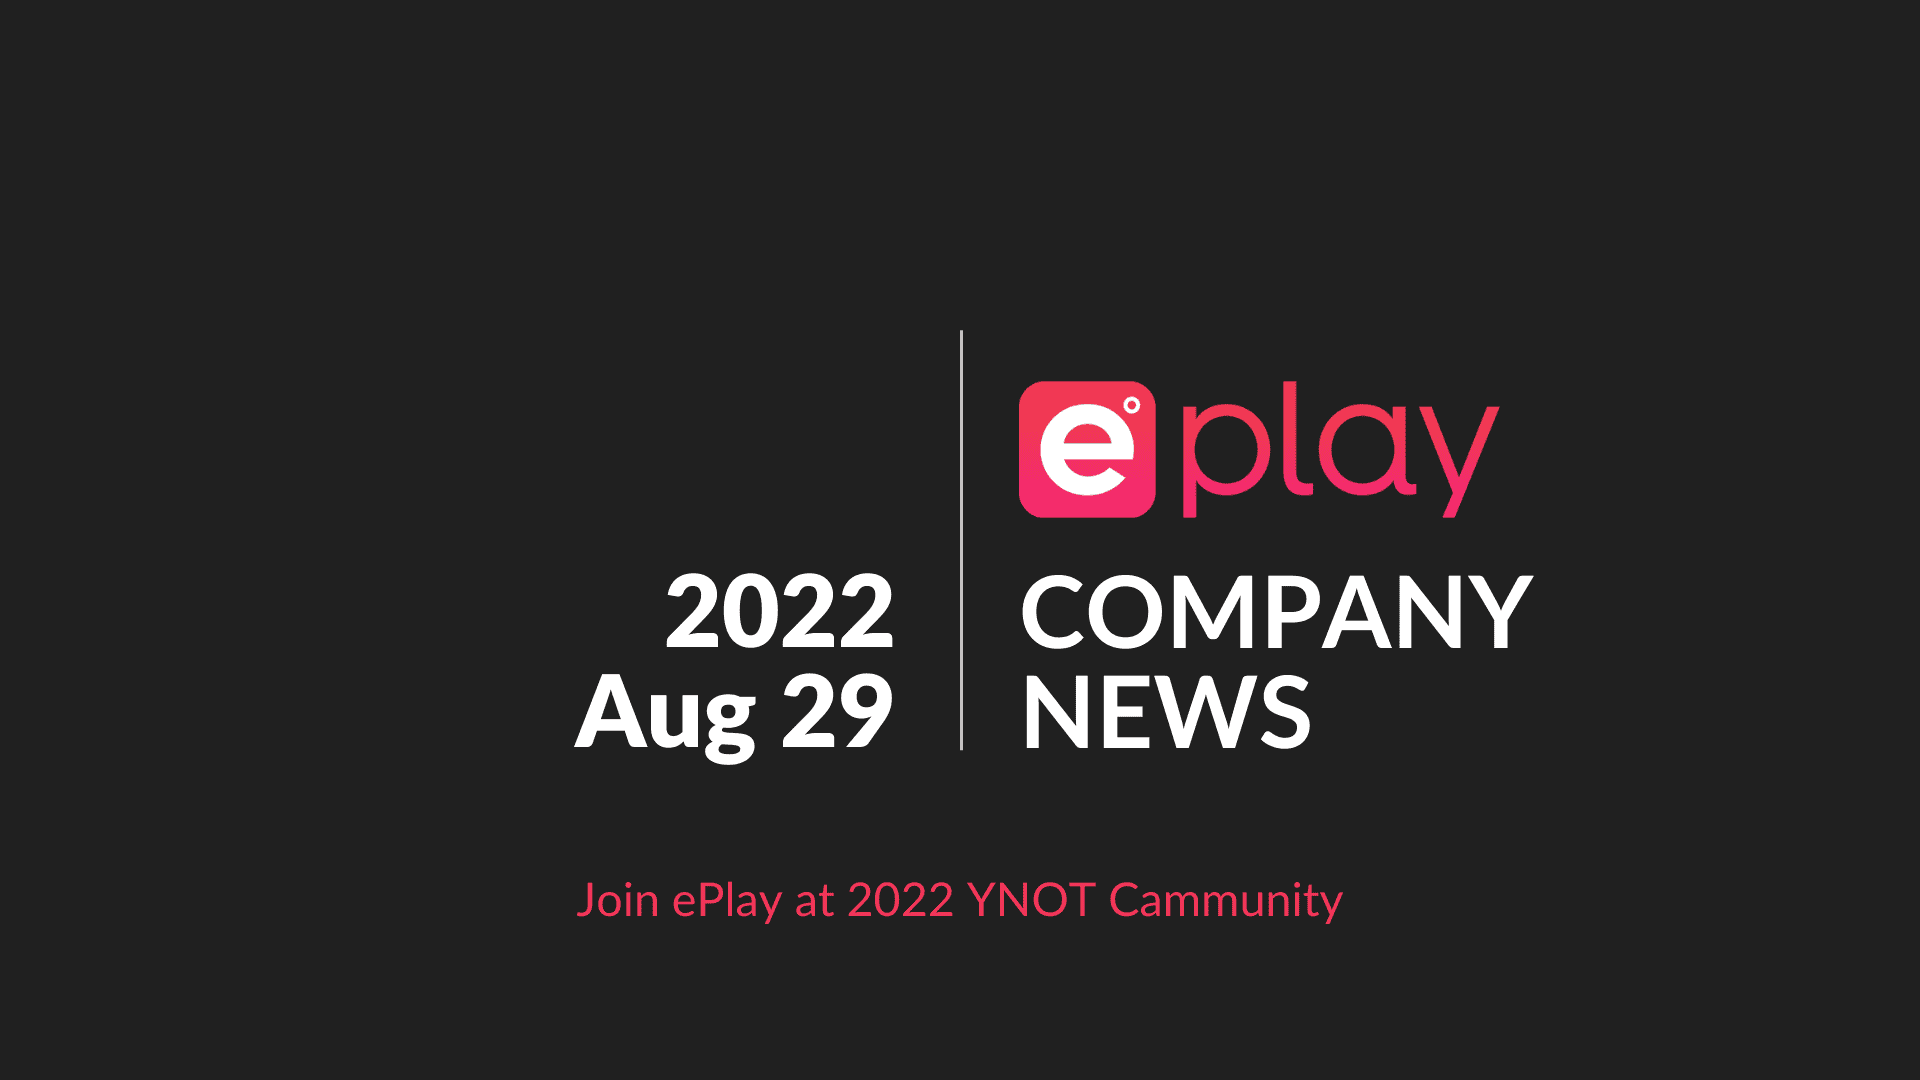 Join ePlay on Discord!